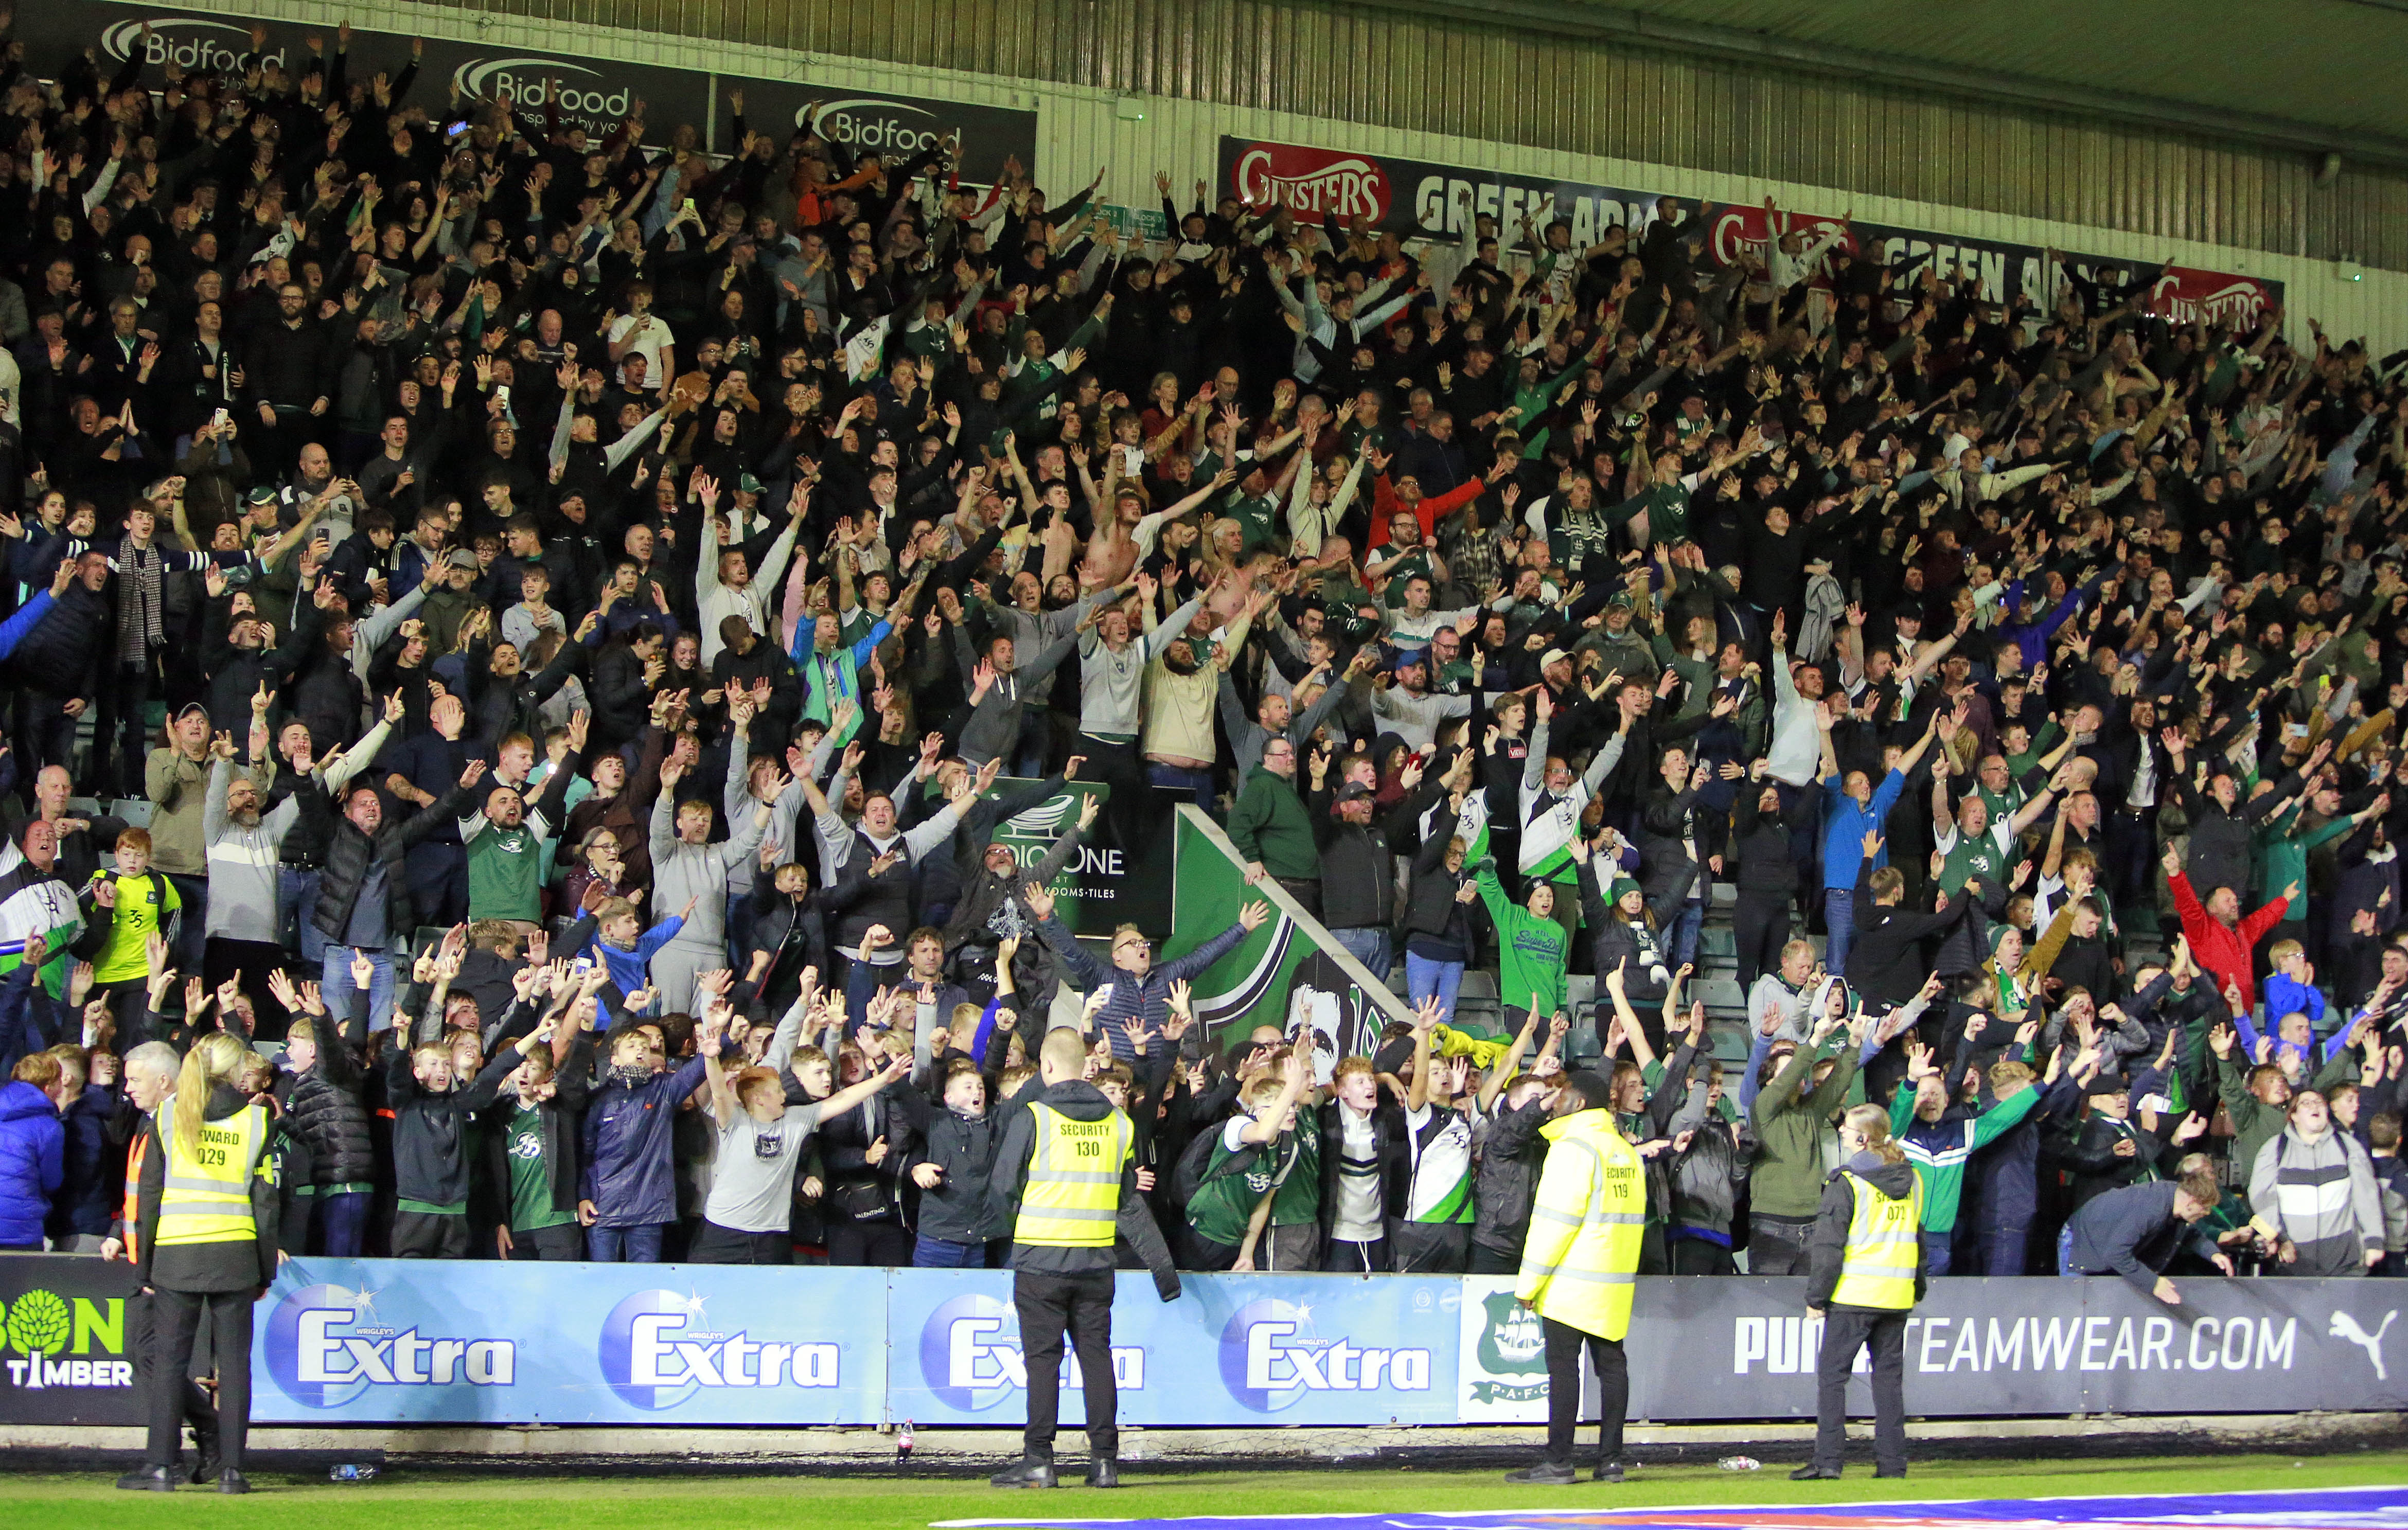 The Green Army